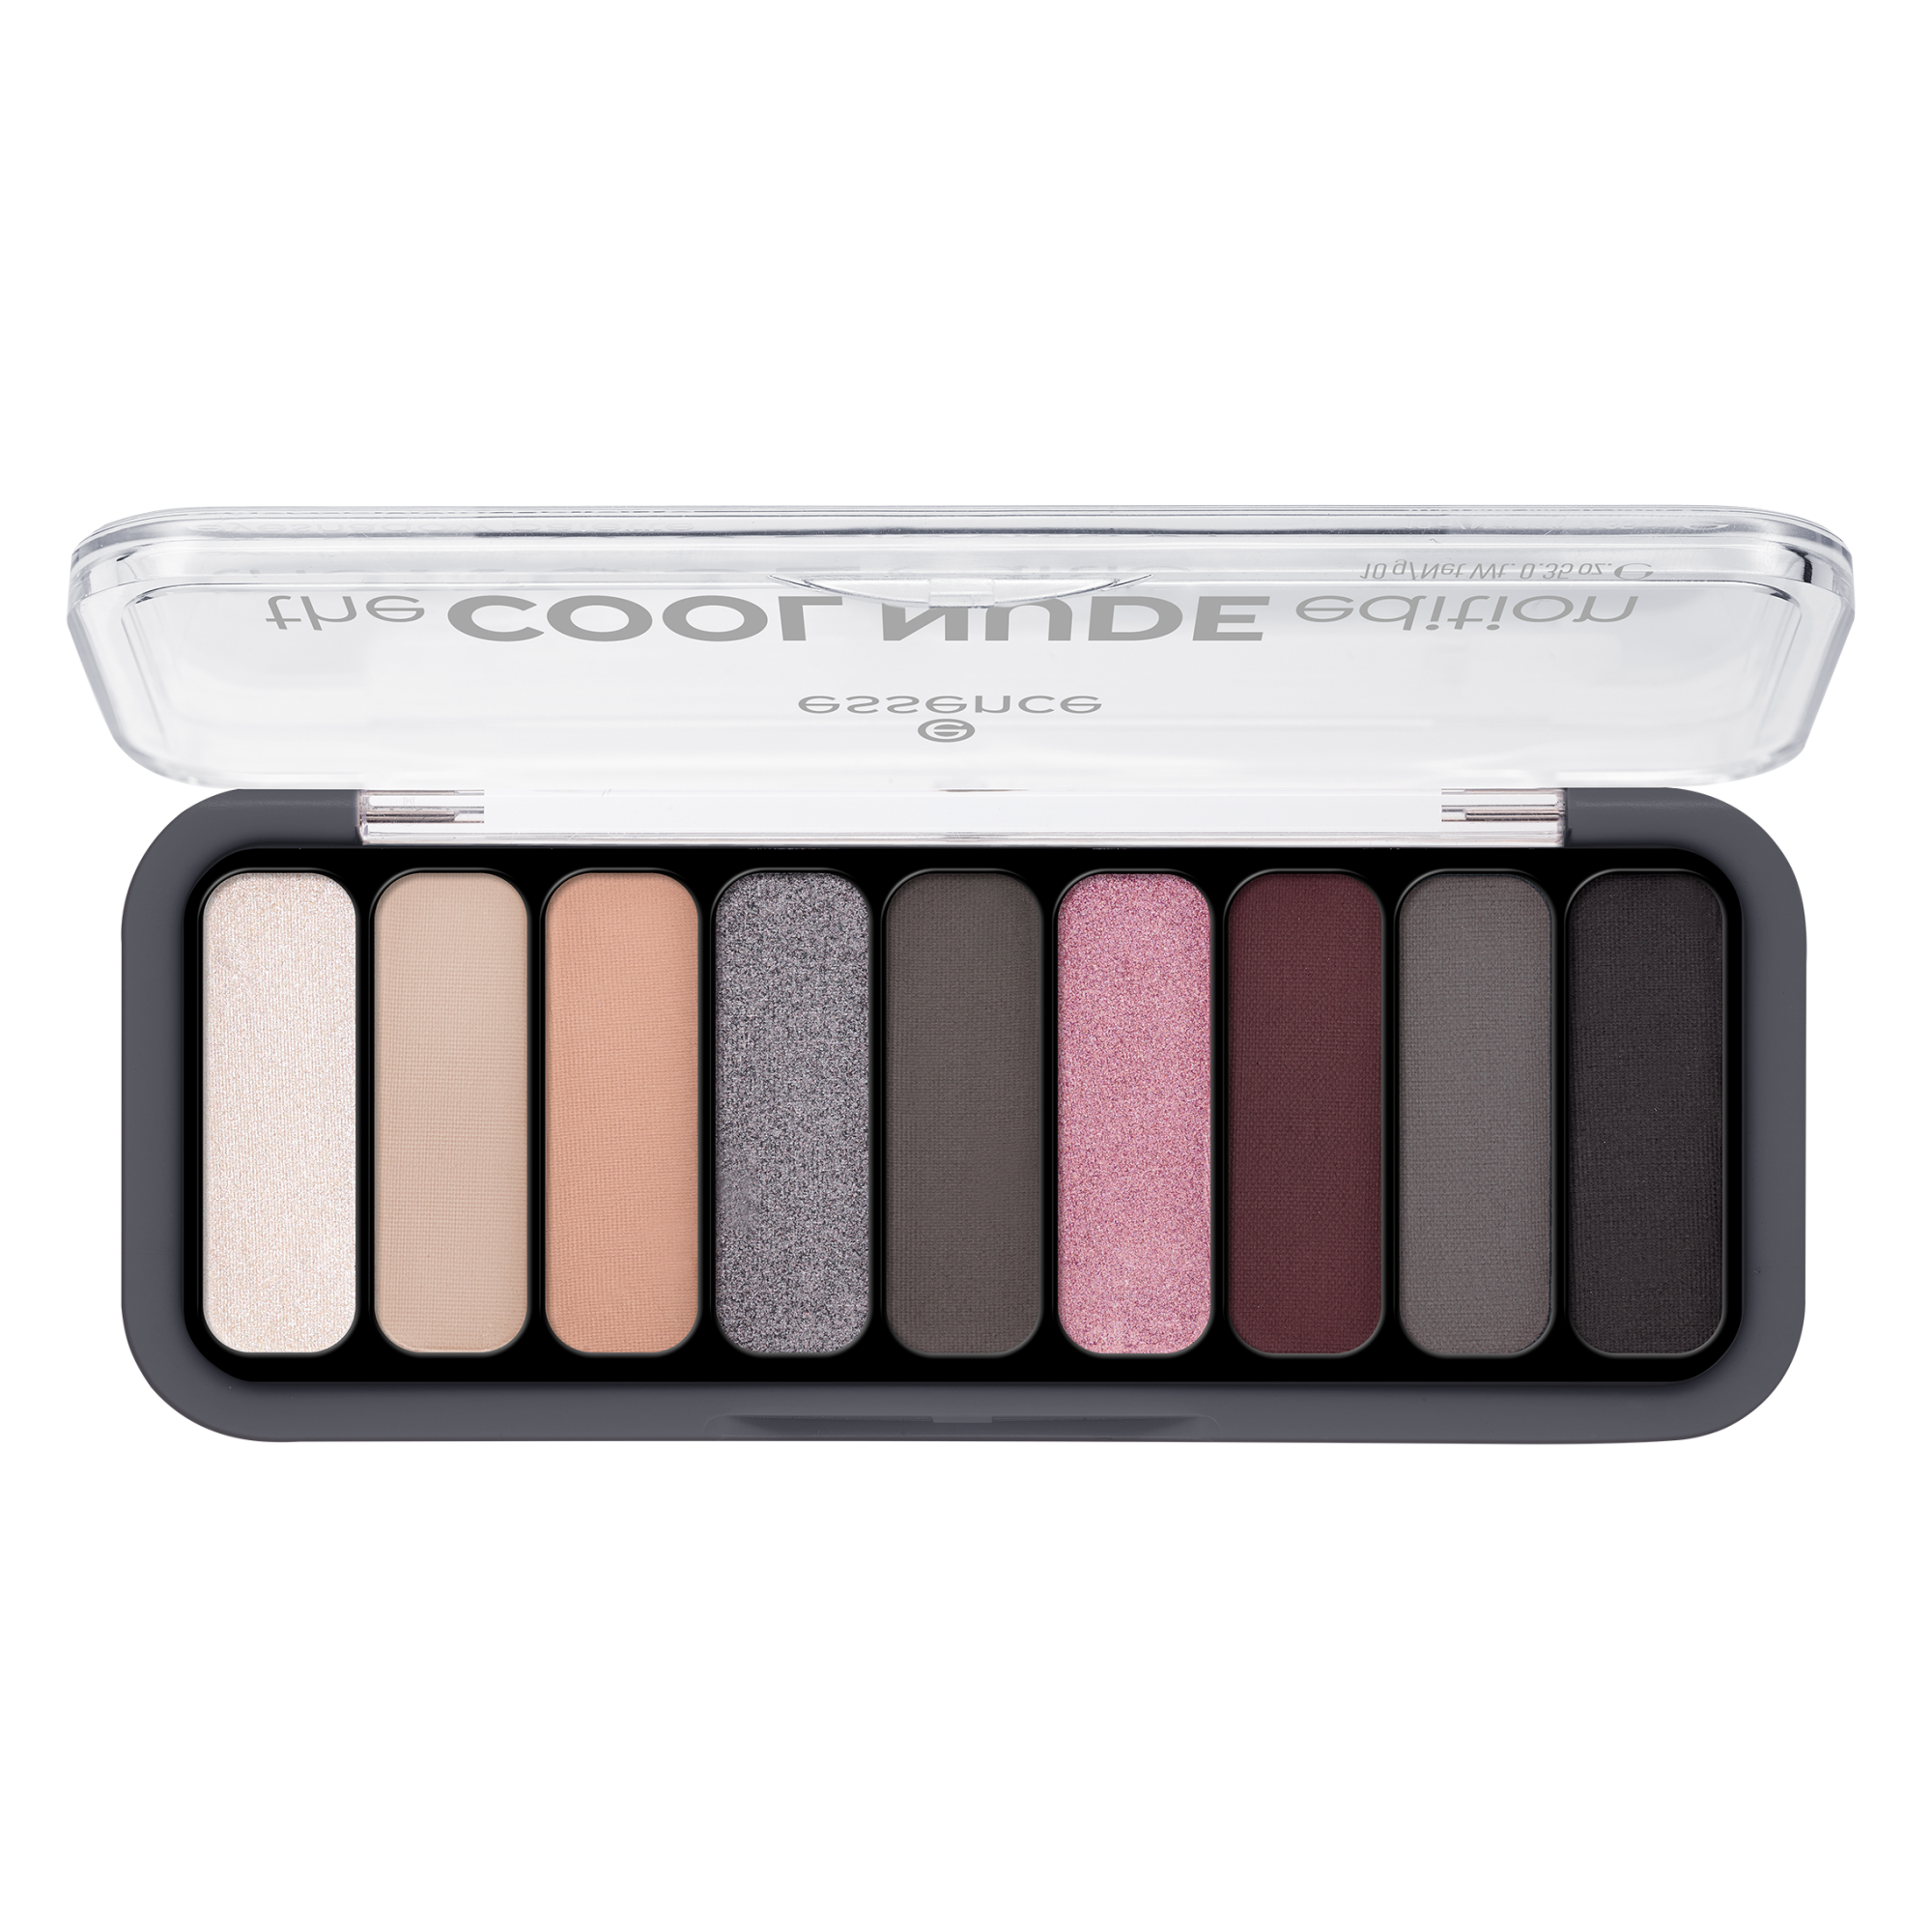 the COOL NUDE edition eyeshadow palette